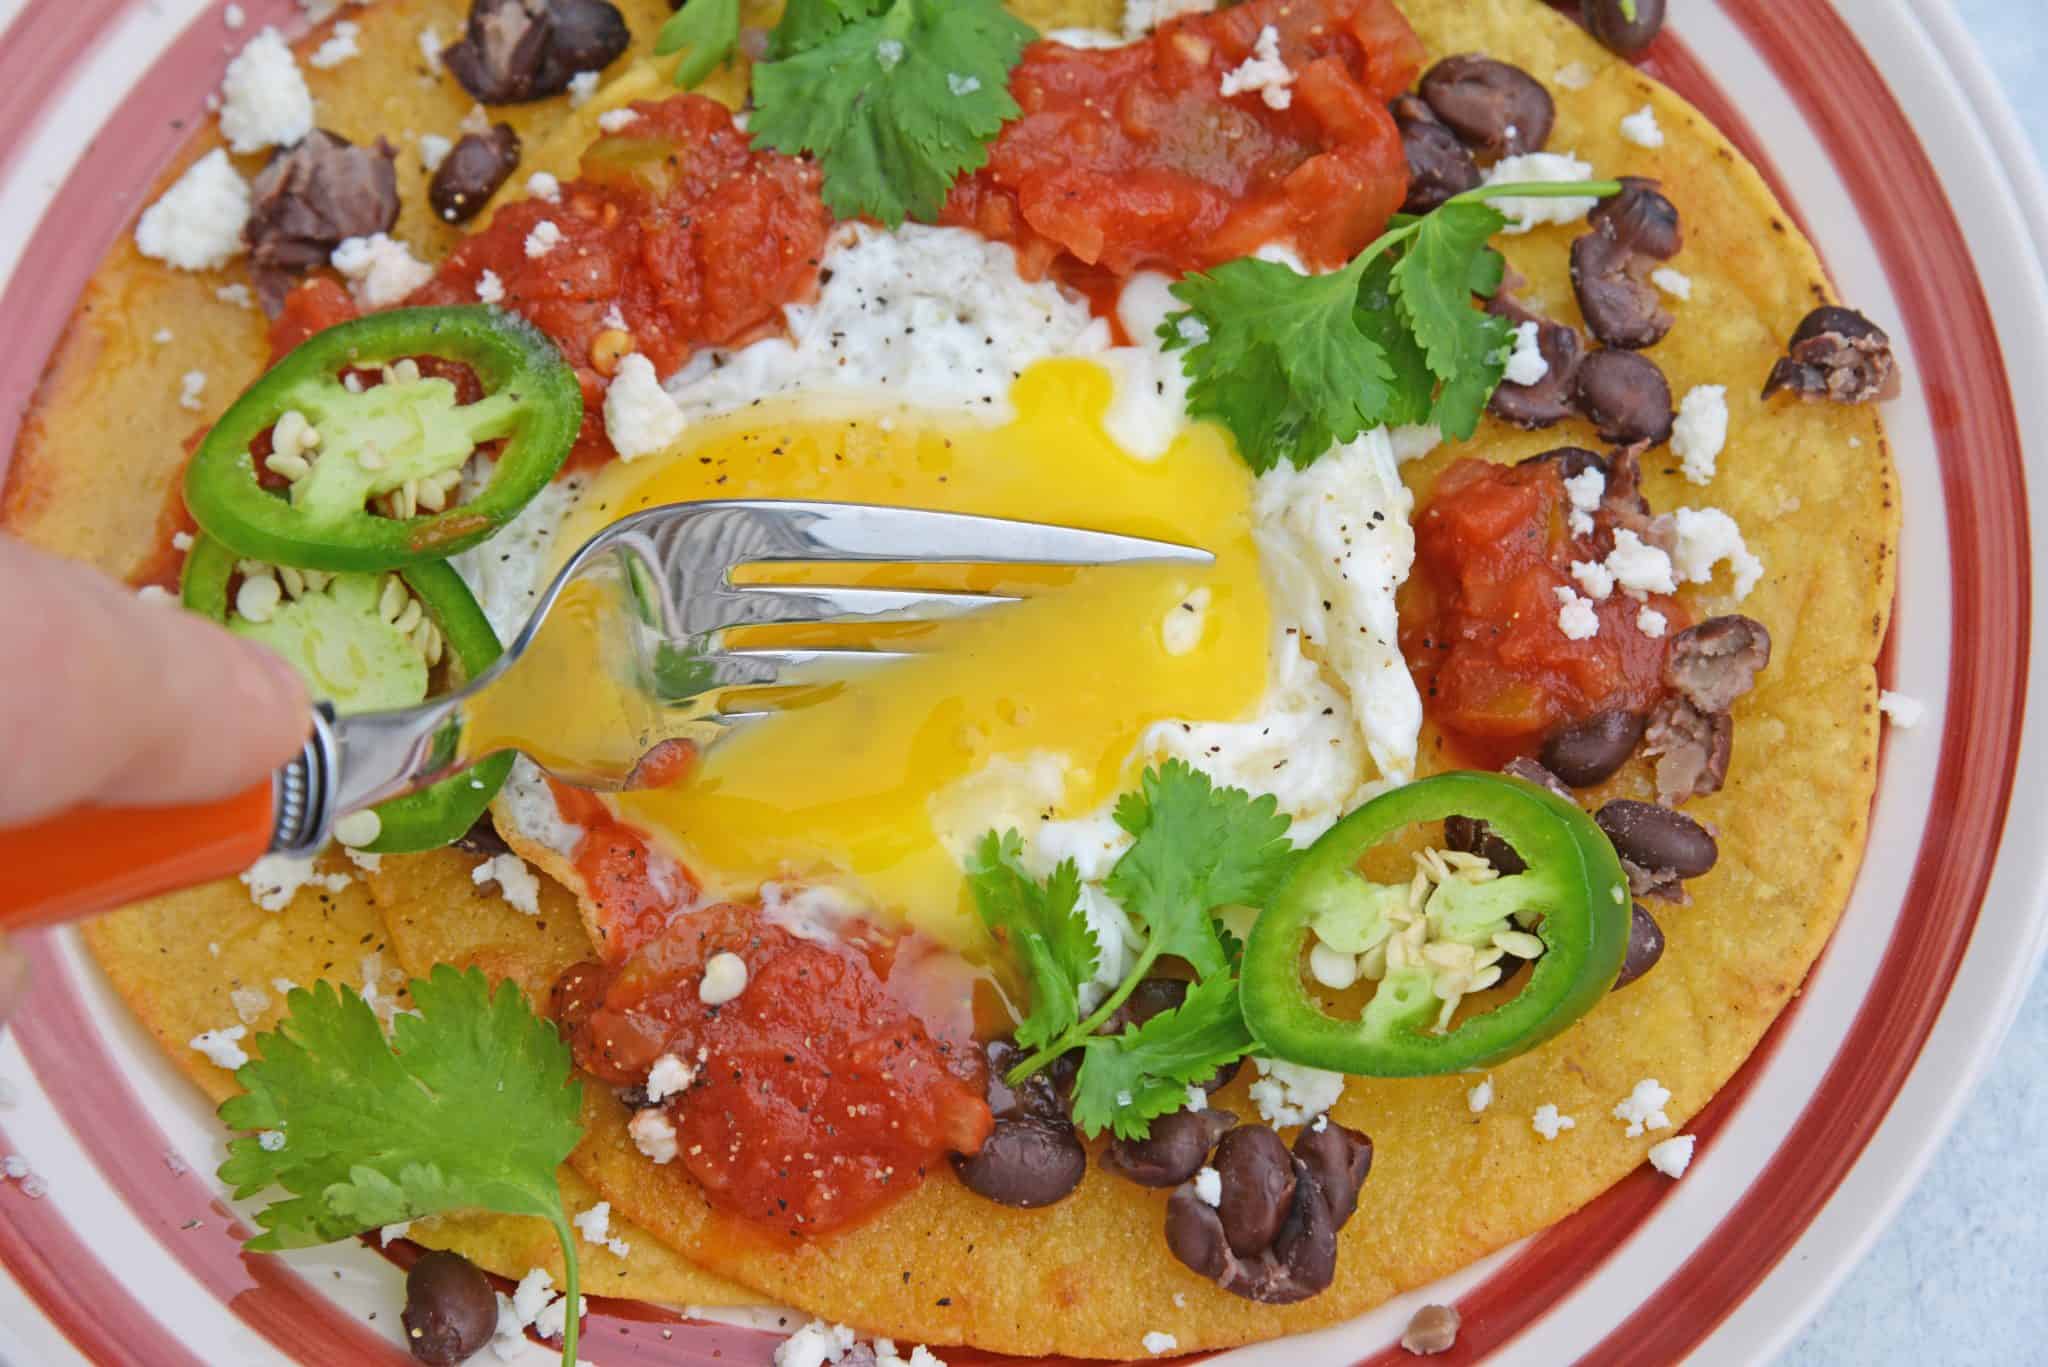 Huevos Rancheros are a great way to spice up your breakfast. Lacey eggs with a runny yolk over warm corn tortillas, chunky salsa, black beans, cilantro and queso fresco. #huevosrancheros www.savoryexperiments.com 